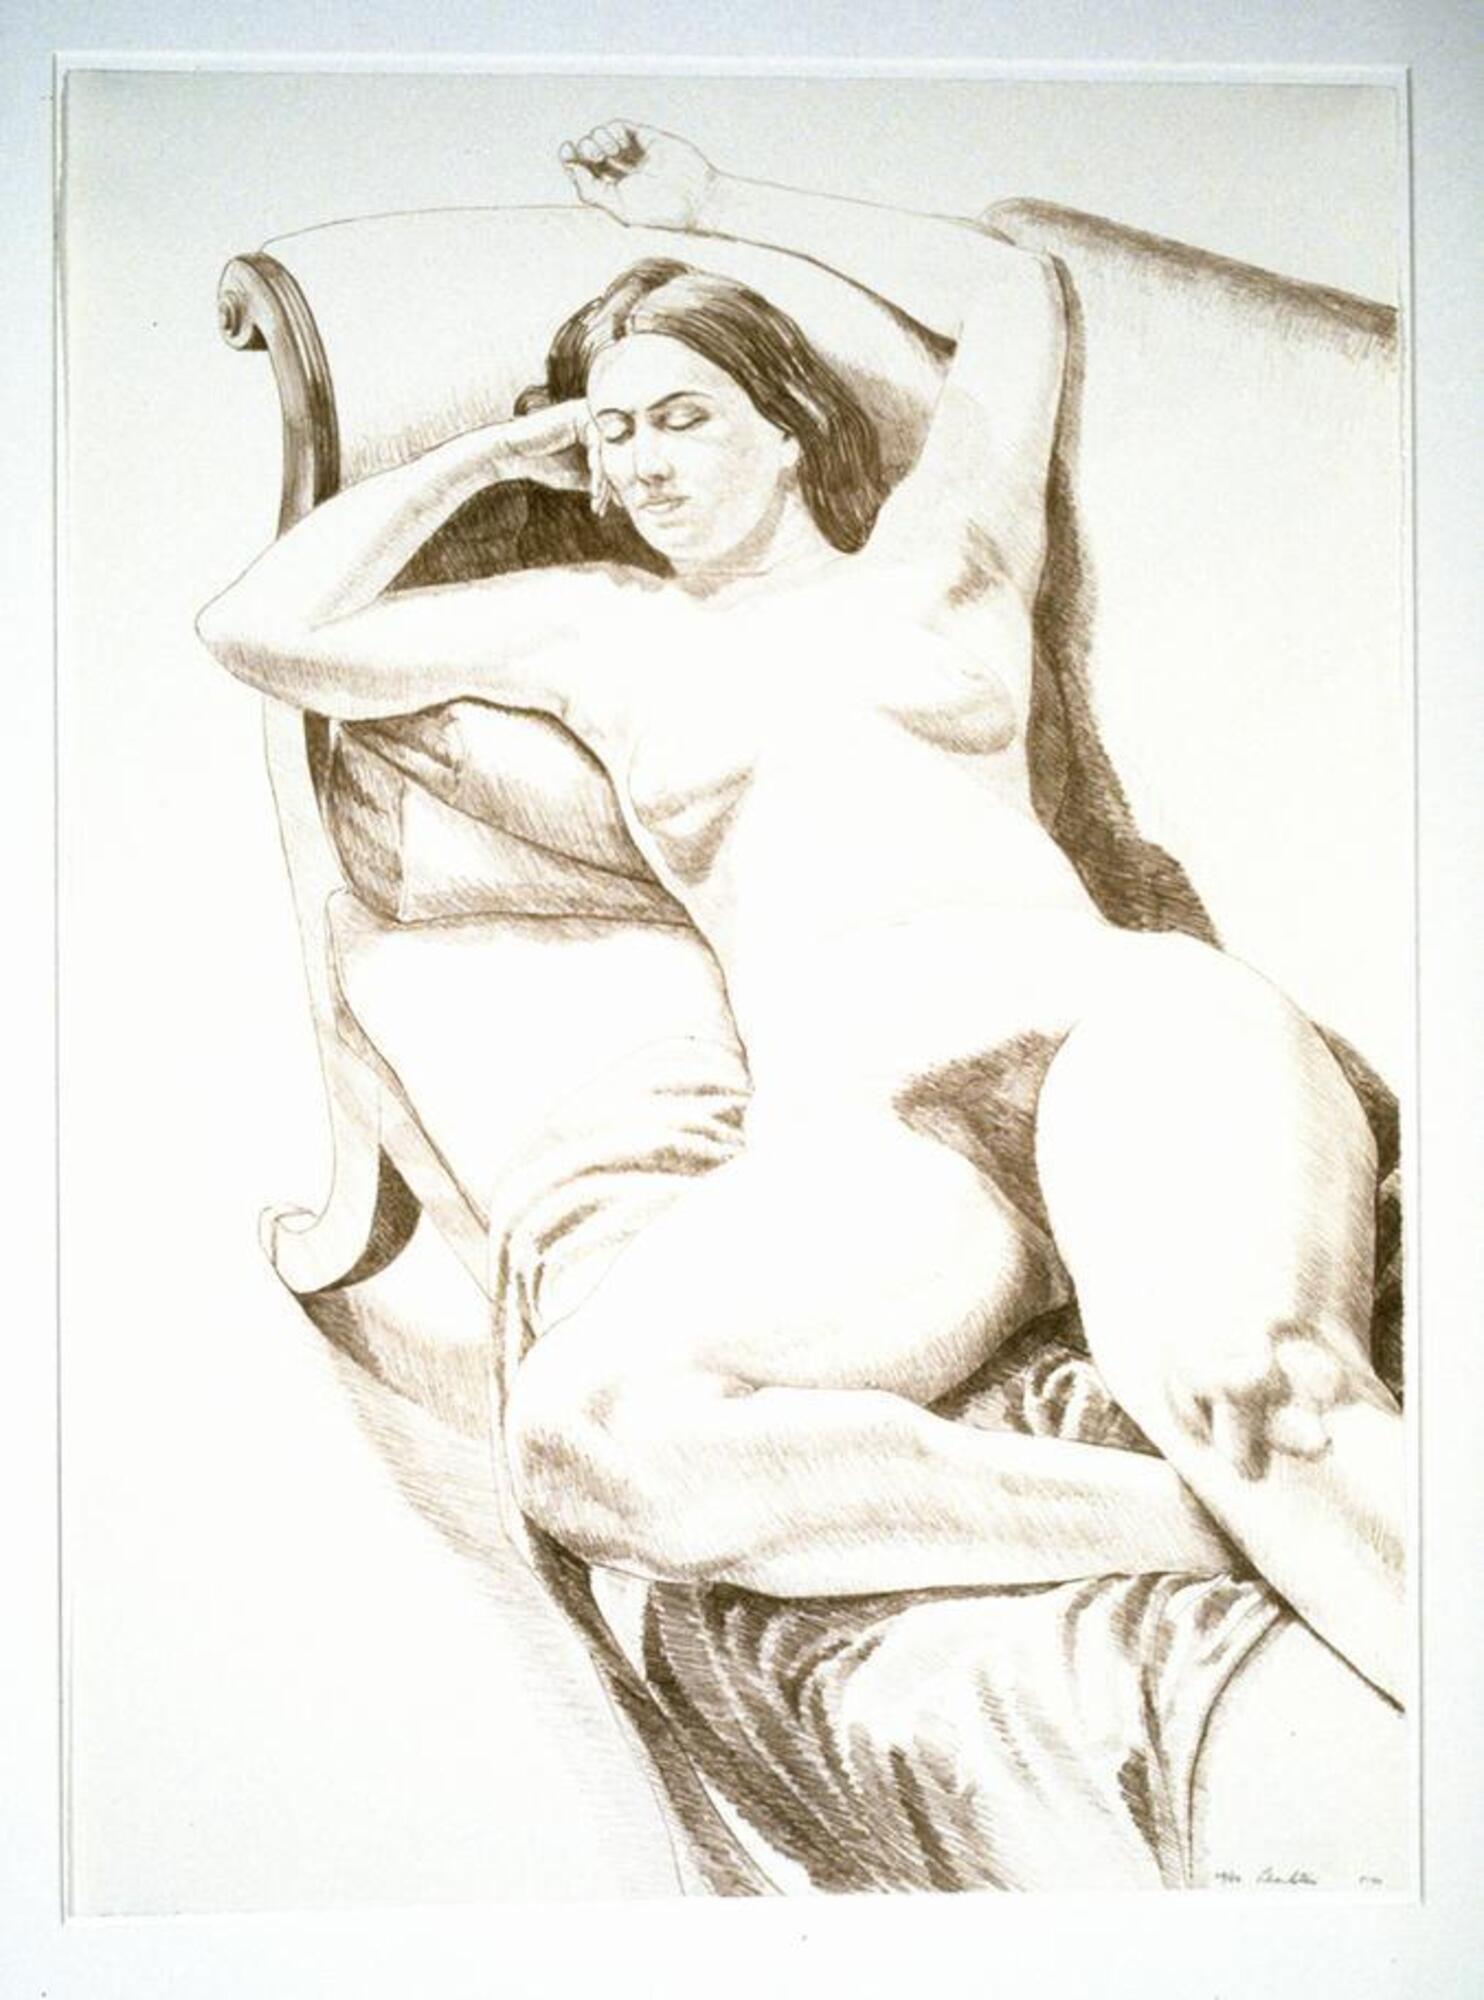 A nude woman with closed eyes reclines on recamier sofa, with feet toward the viewer, and her head on the arm of the sofa. She rests her arms above her head.